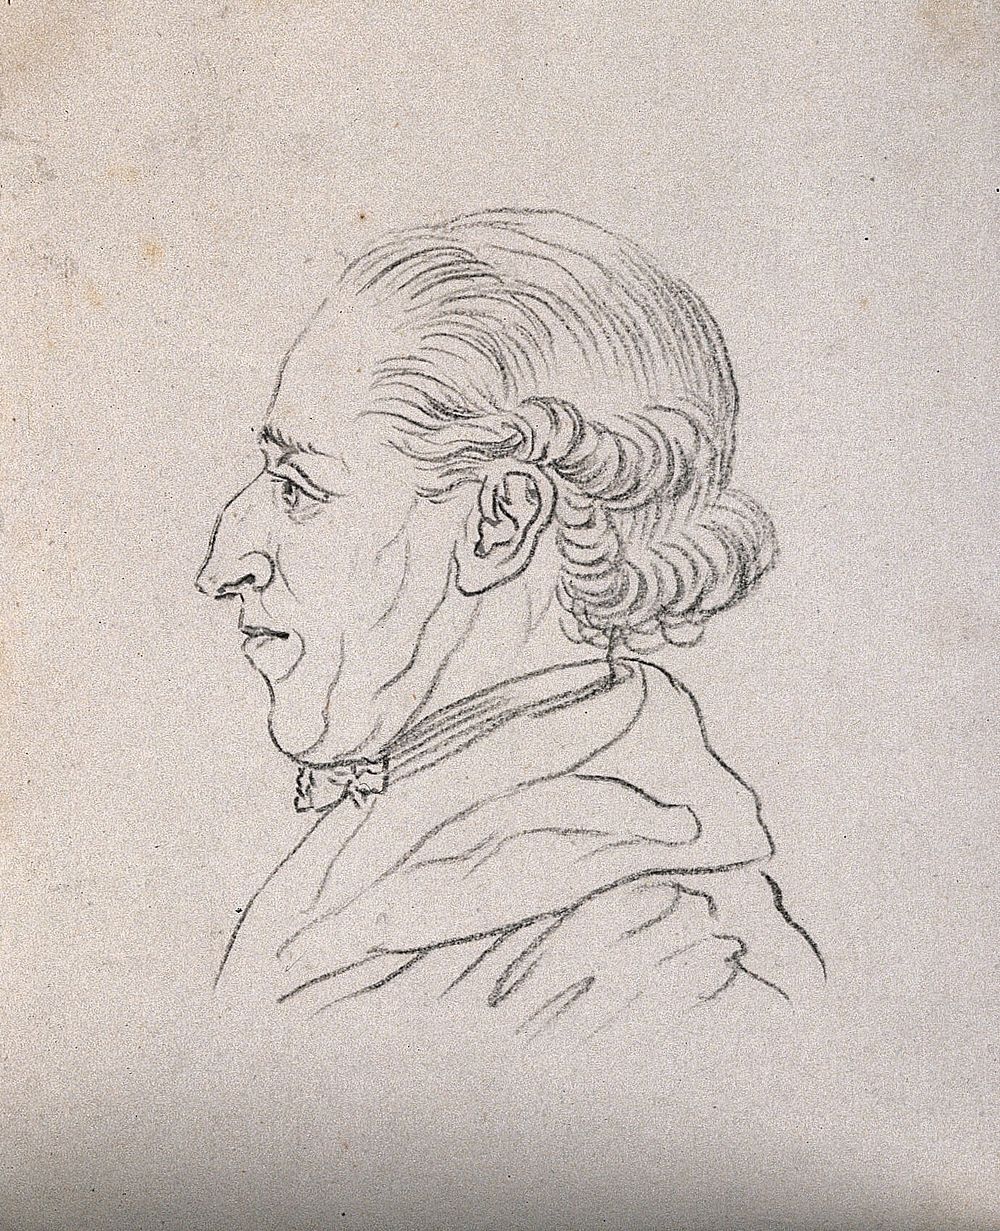 A man whose physiognomy reveals a "sage, honorable, sprightly, judicious, profound, pious" character. Drawing, c. 1794.